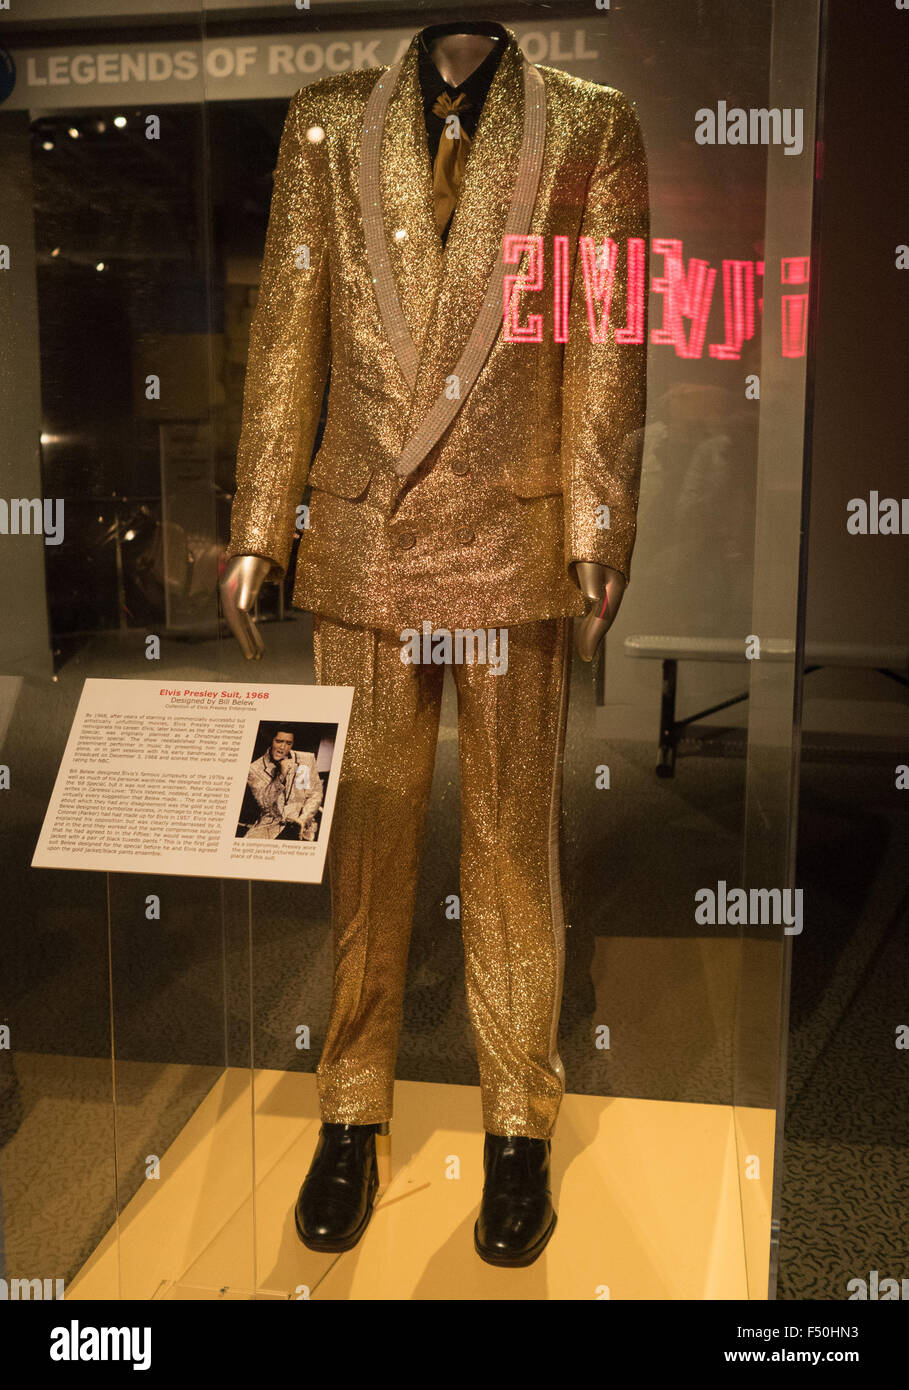 Shiny gold suit worn by Elvis Presley located in the Rock & Roll Hall of Fame in Cleveland, Ohio Stock Photo